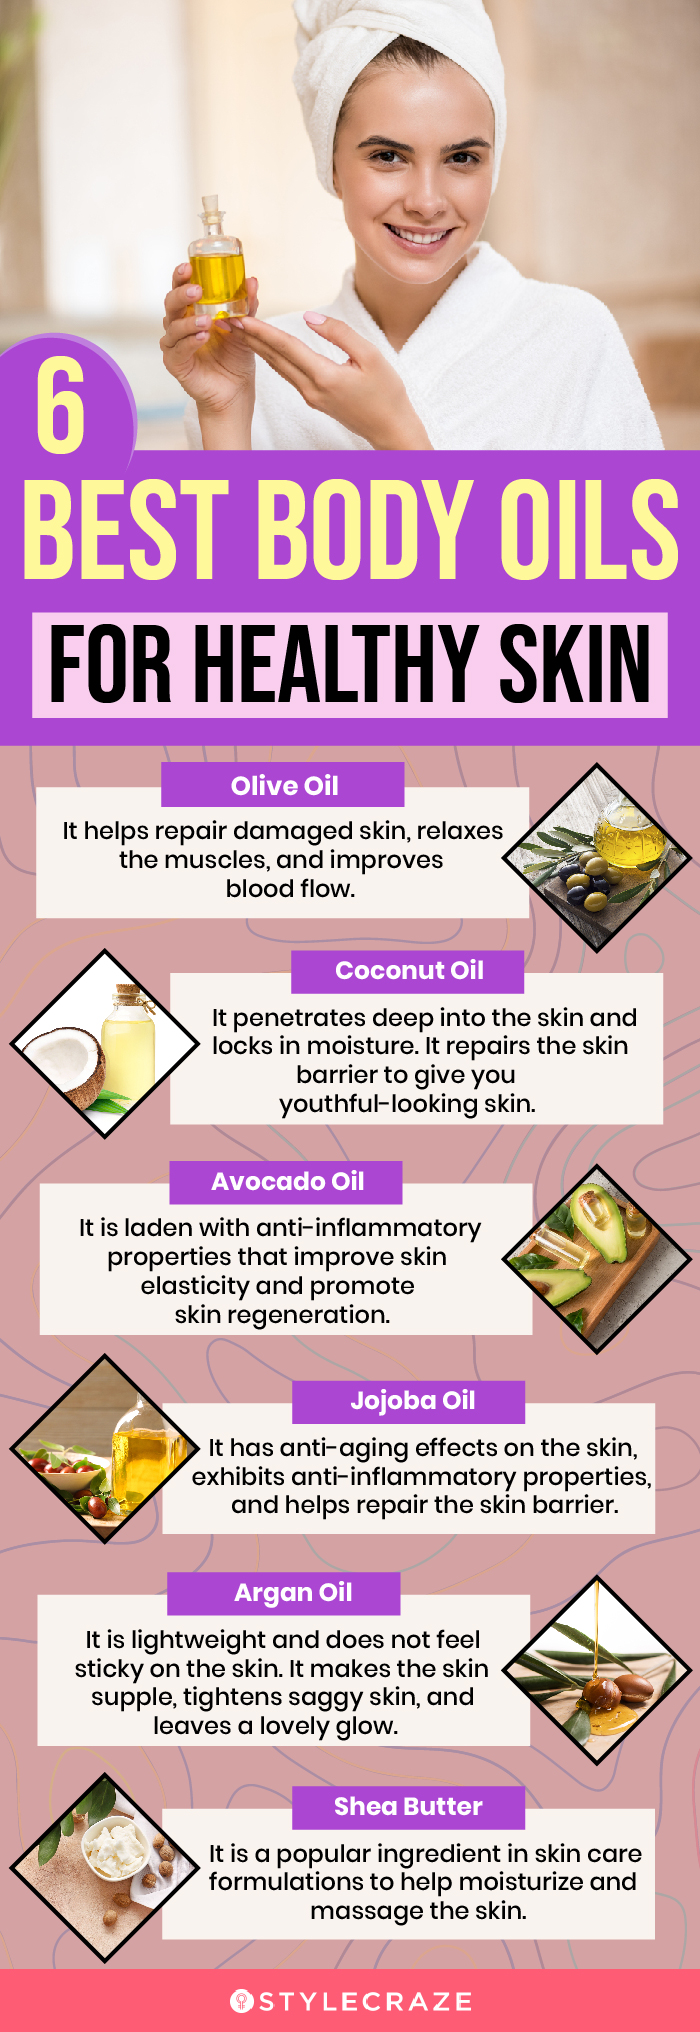 6 best body oils for healthy skin (infographic)